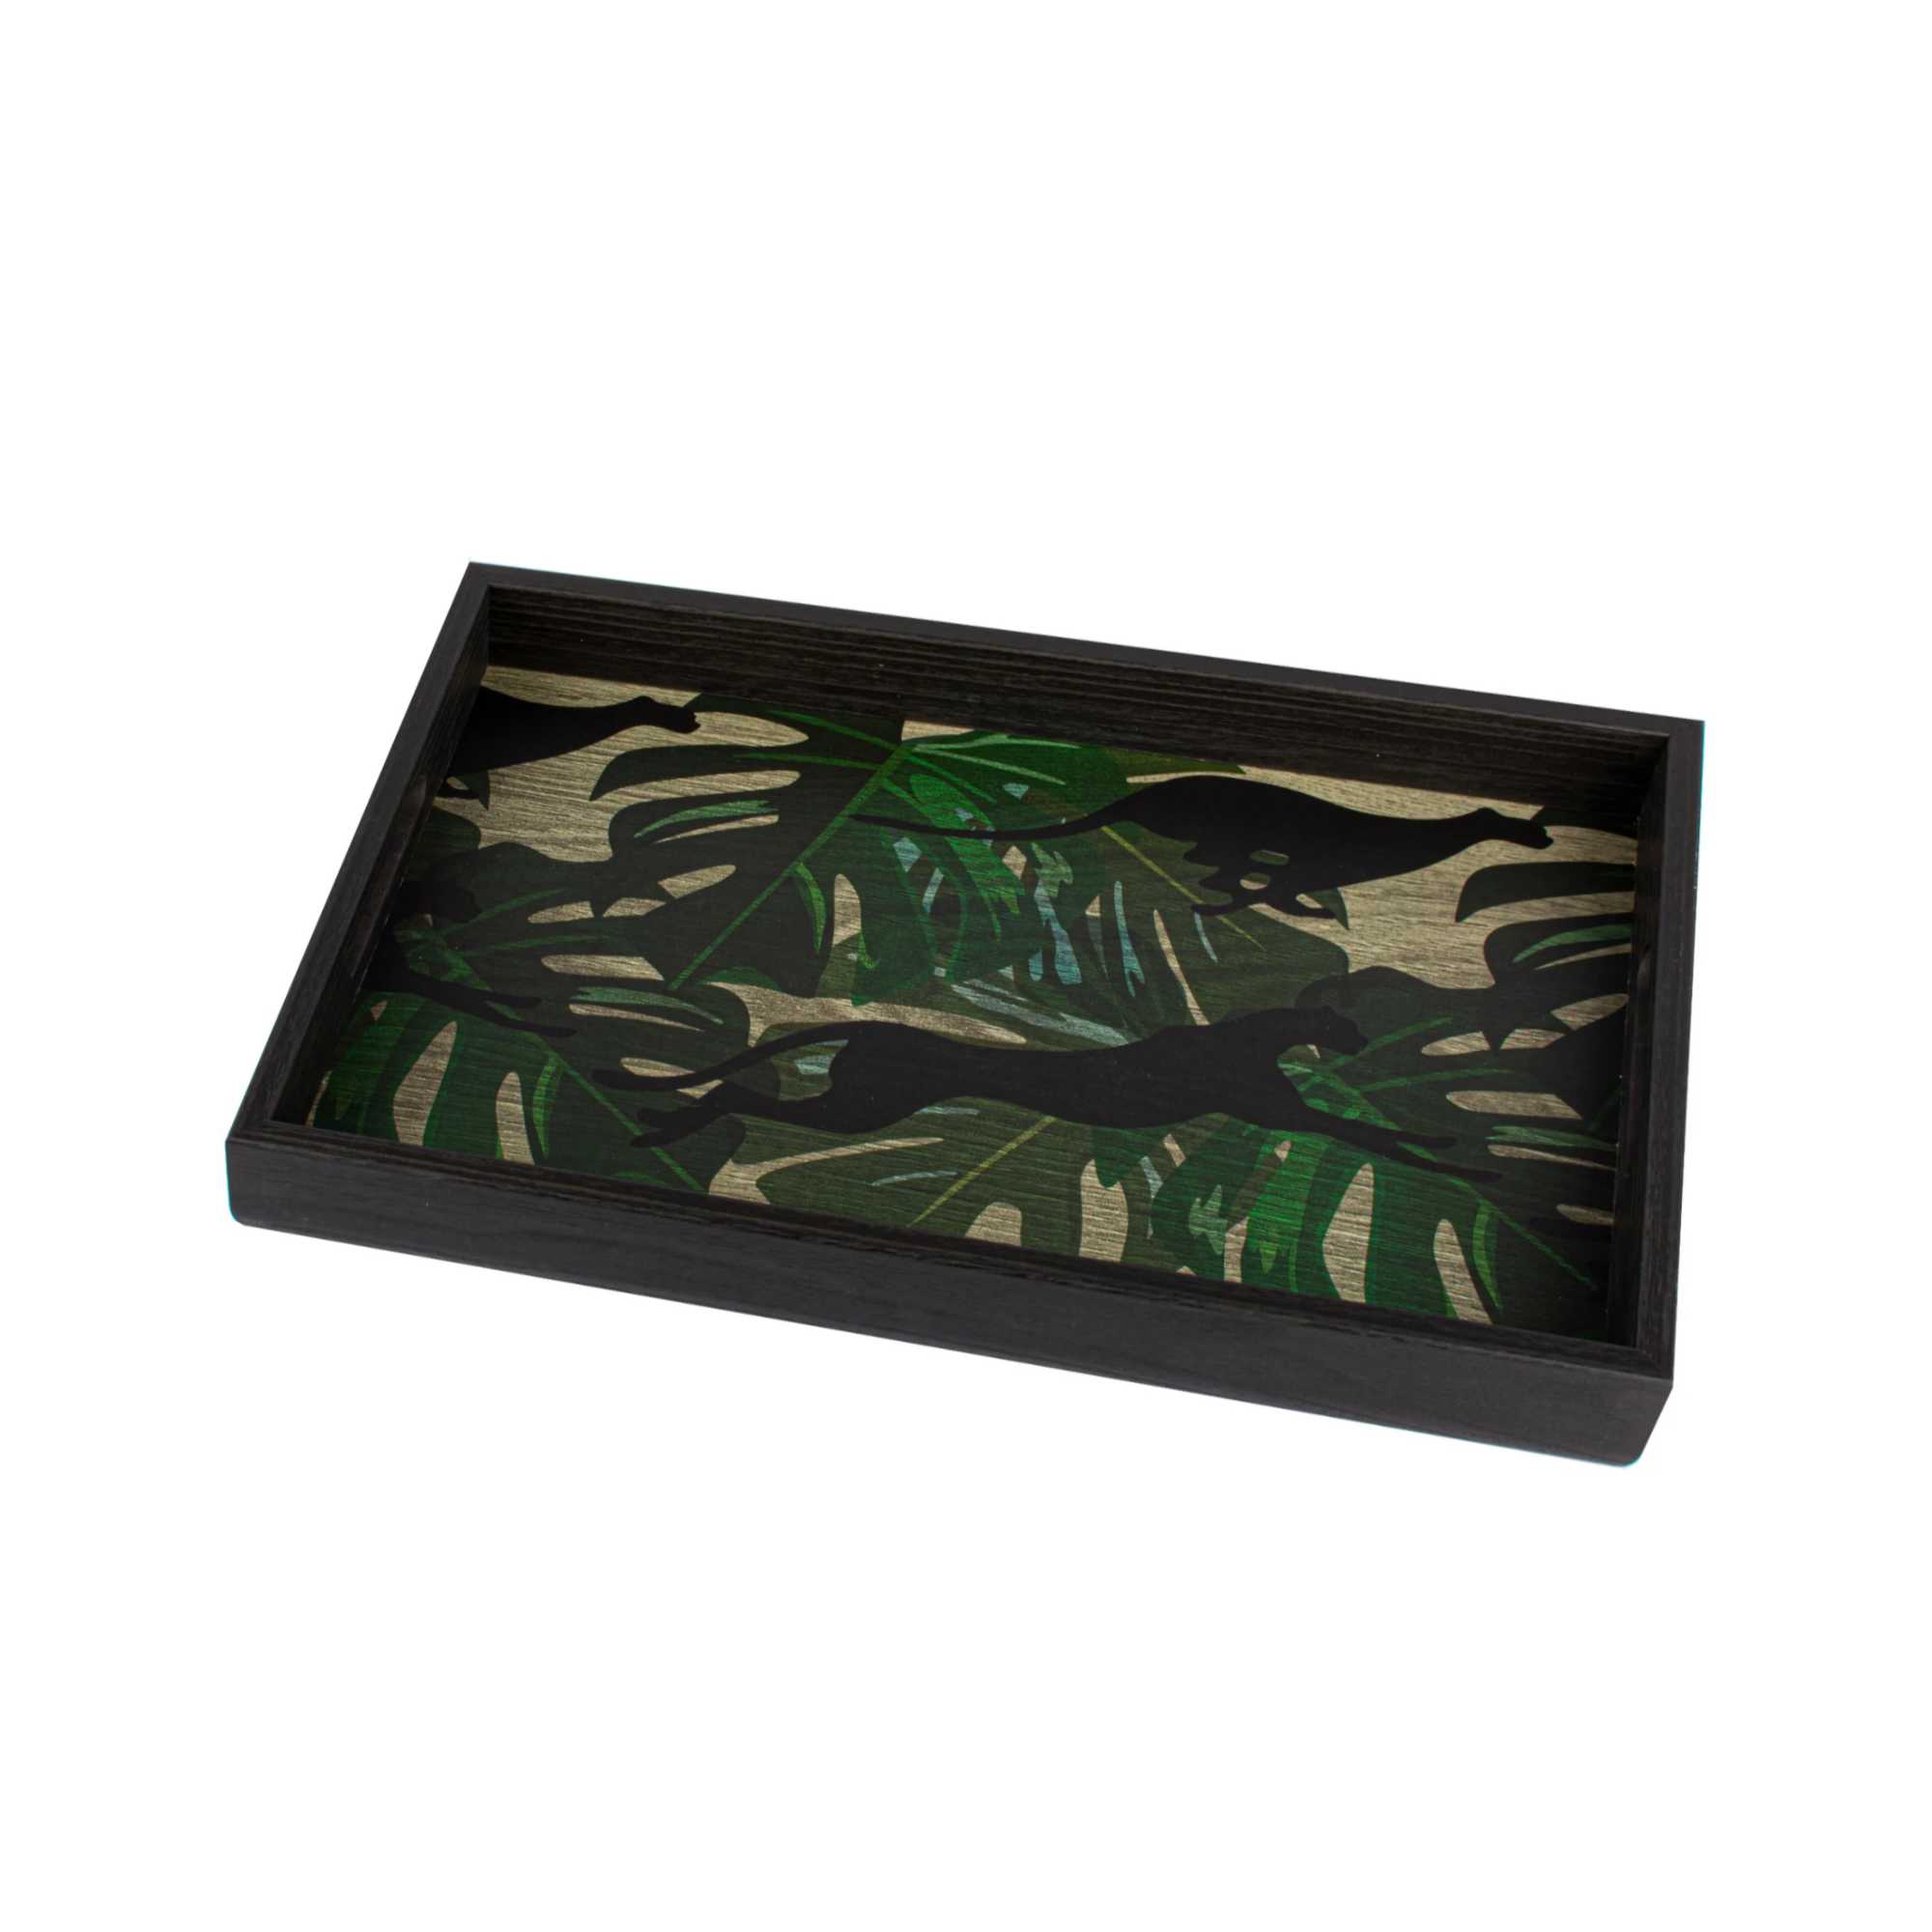 Manopoulos Wooden Tray (45x32cm) , Panther